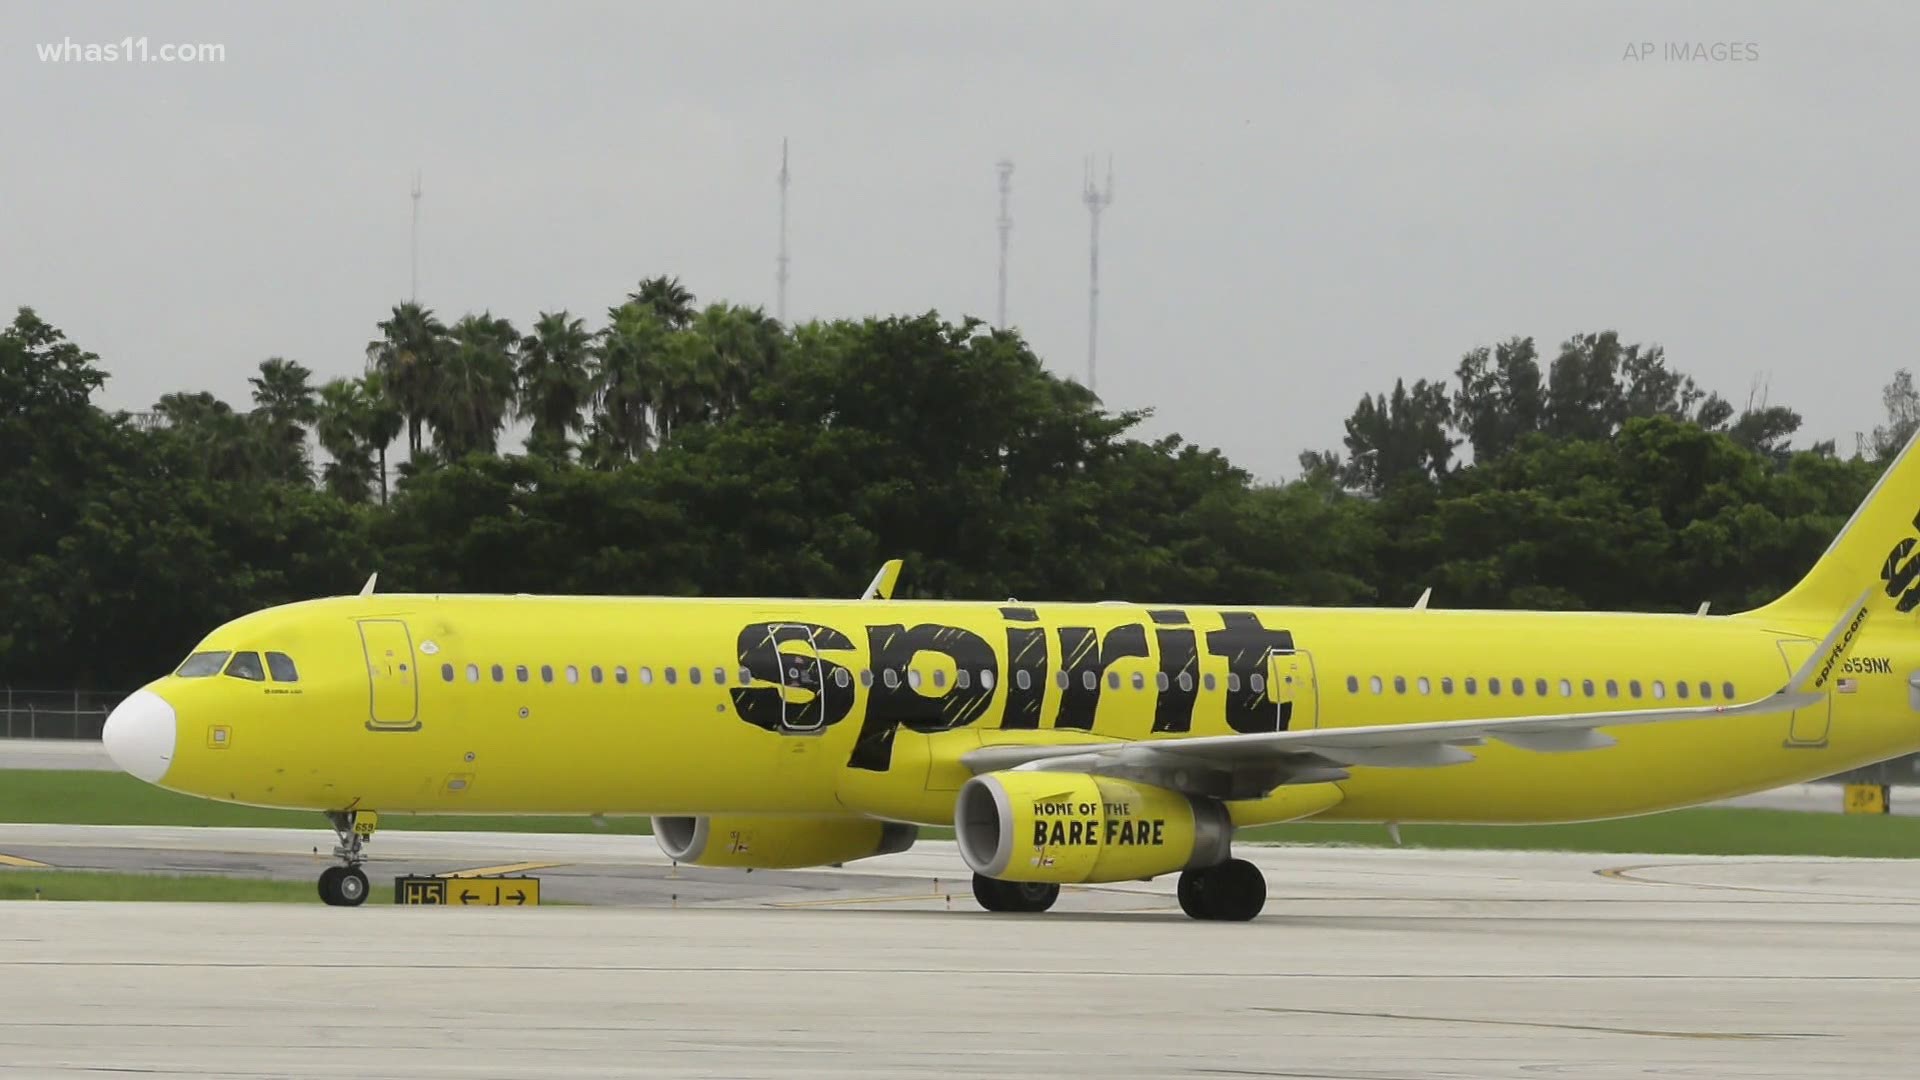 Starting May 27, Spirit will offer flights to Los Angeles, Las Vegas, Orlando and Fort Lauderdale.